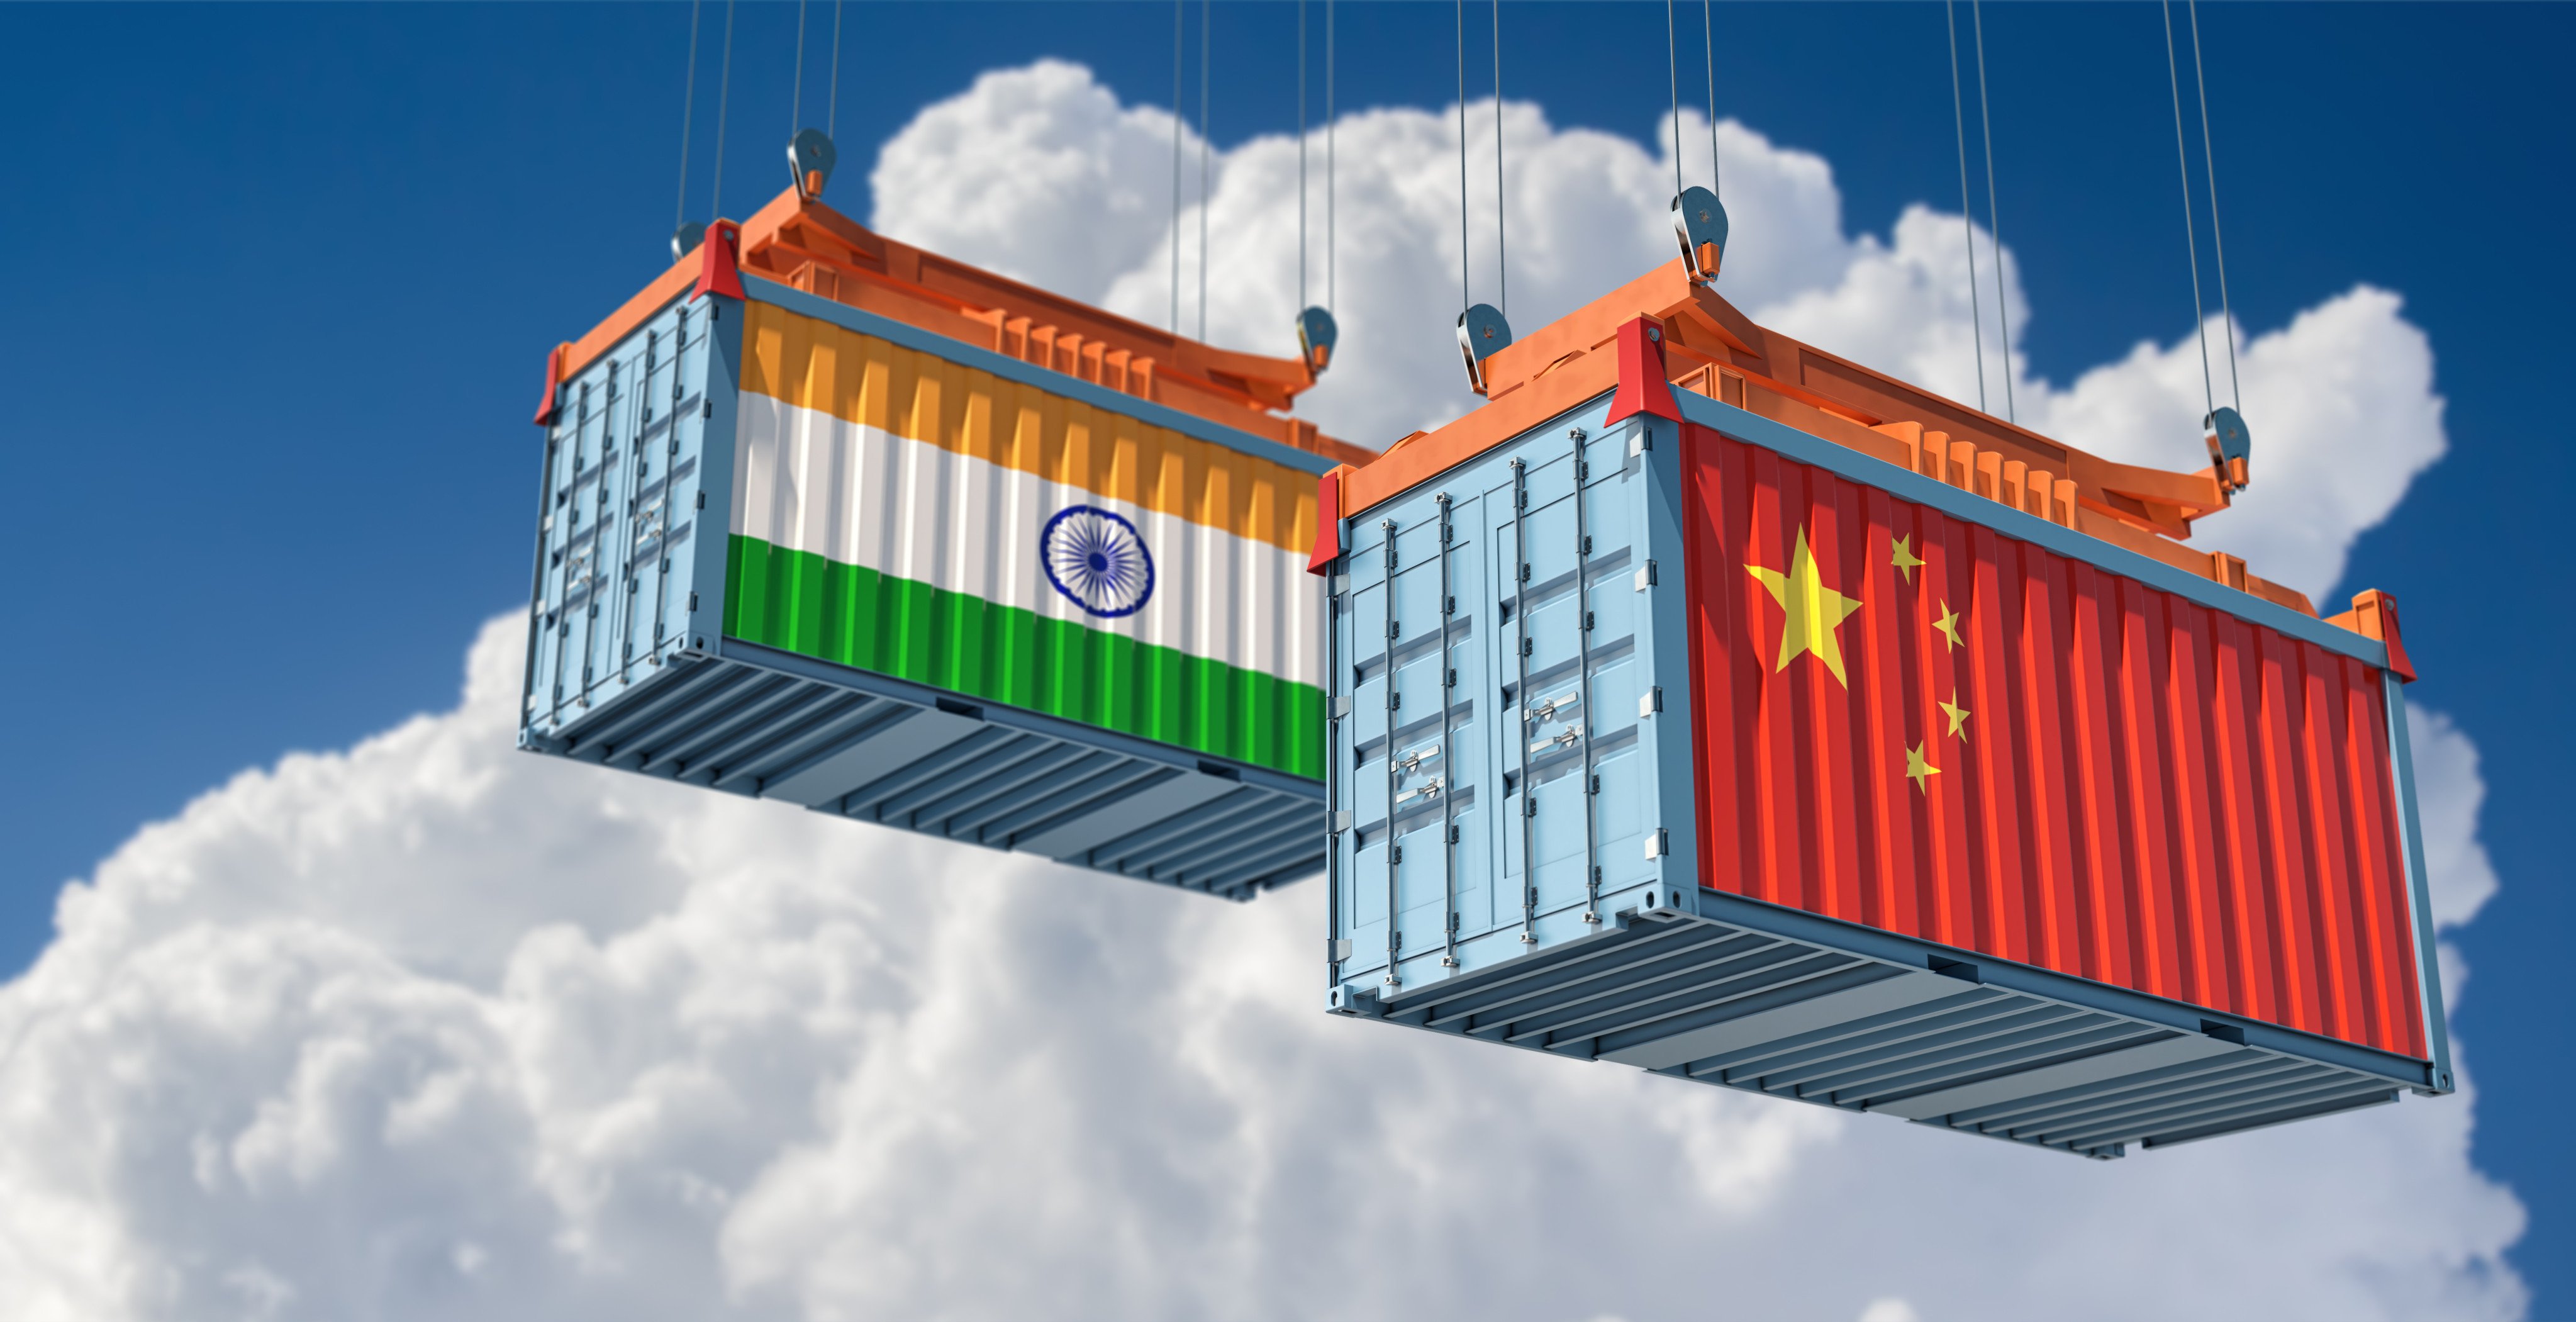 Since September, India has launched a spate of anti-dumping investigations into made-in-China products. Photo: Shutterstock